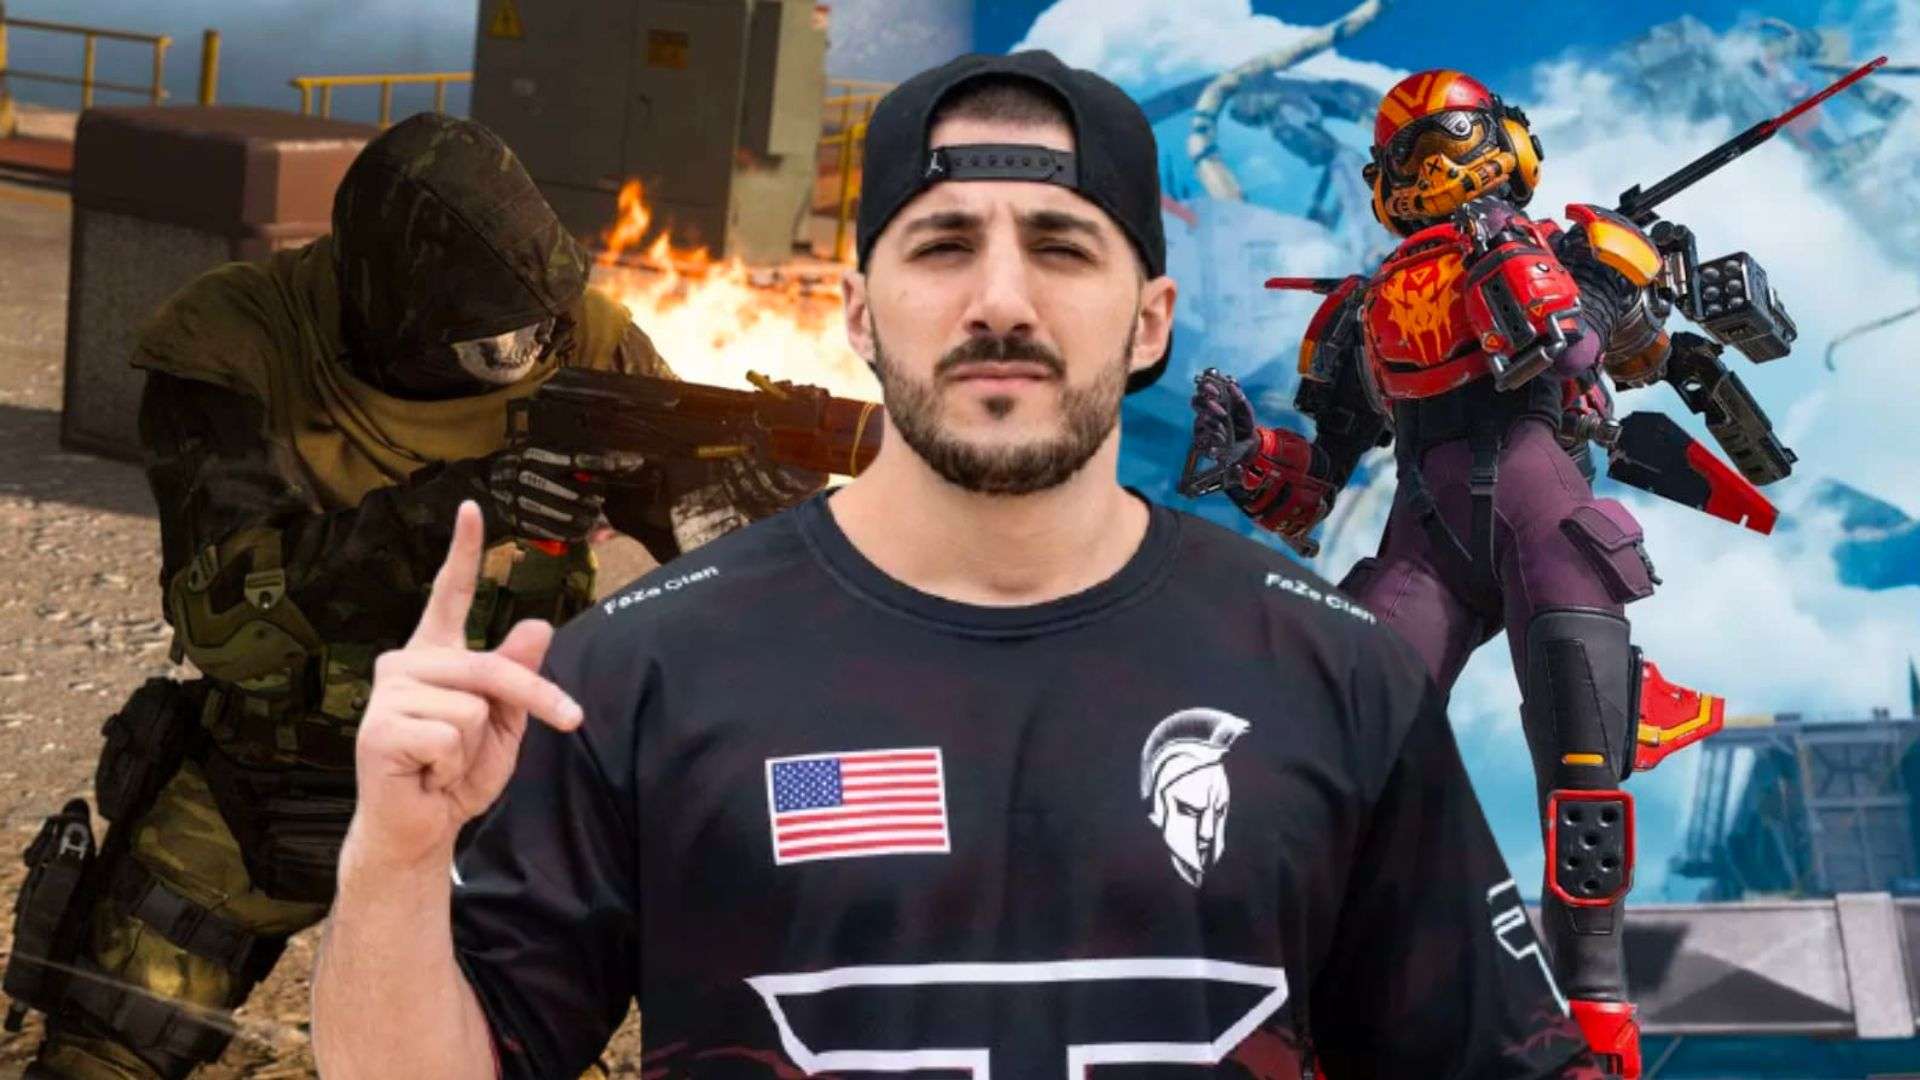 NICKMERCS in FaZe shirt in front of Warzone and Apex Legends characters